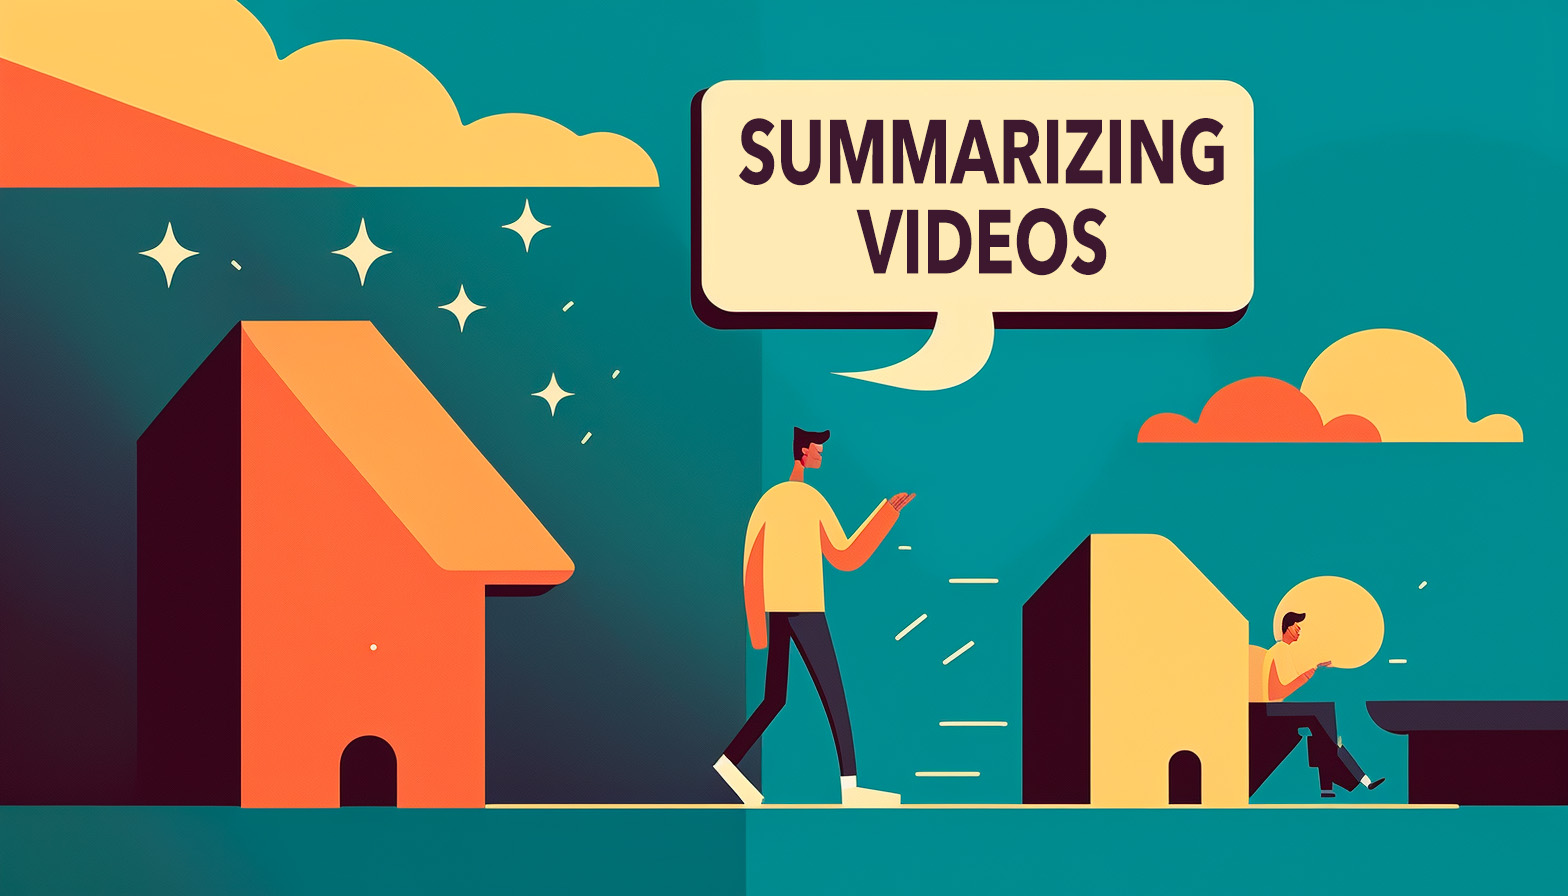 AI-generated illustration of summarizing videos, house getting smaller